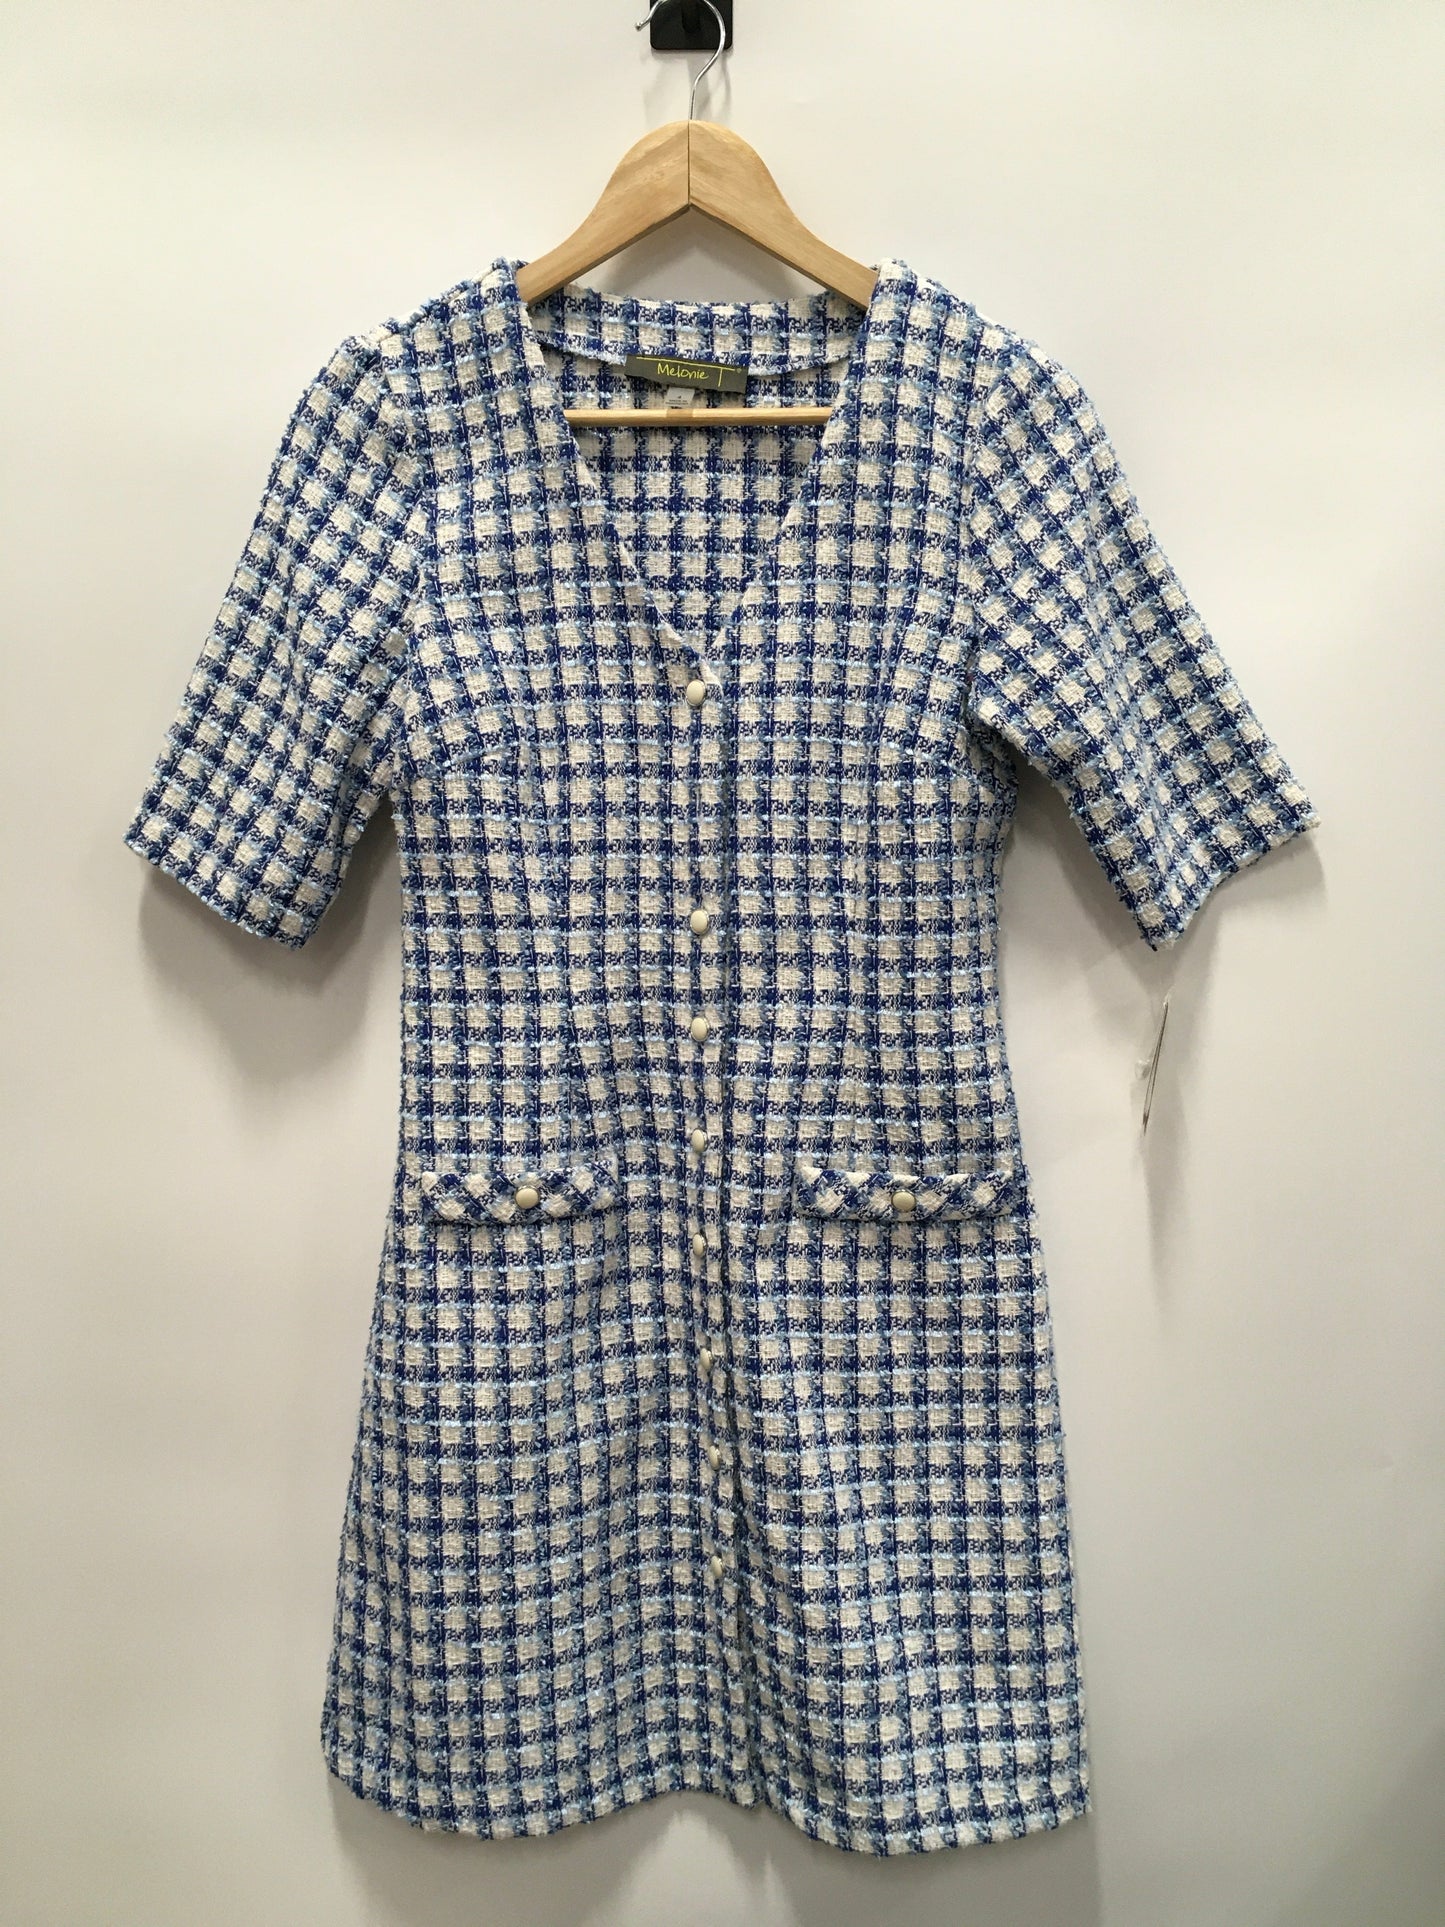 Blue & White Dress Work Clothes Mentor, Size S